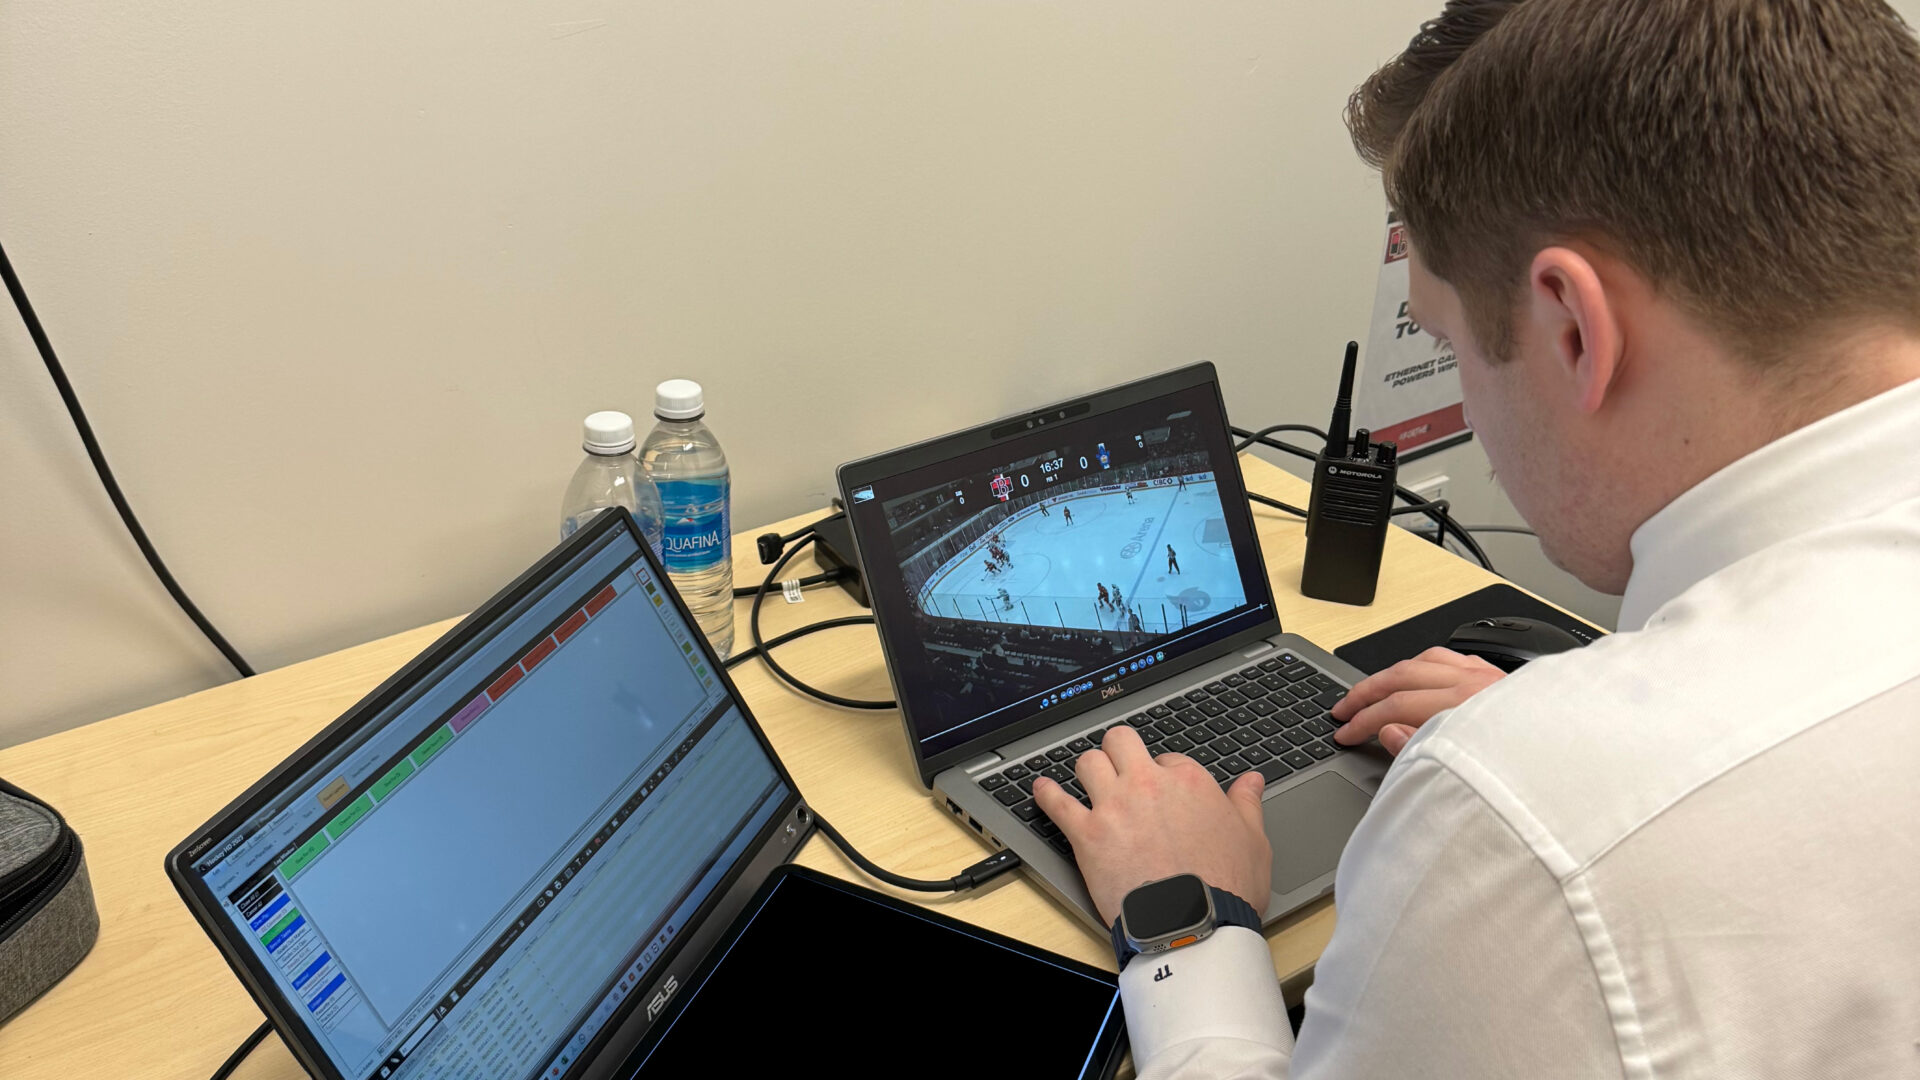 A focused hockey coach analyzing live game footage on a laptop at the rink.